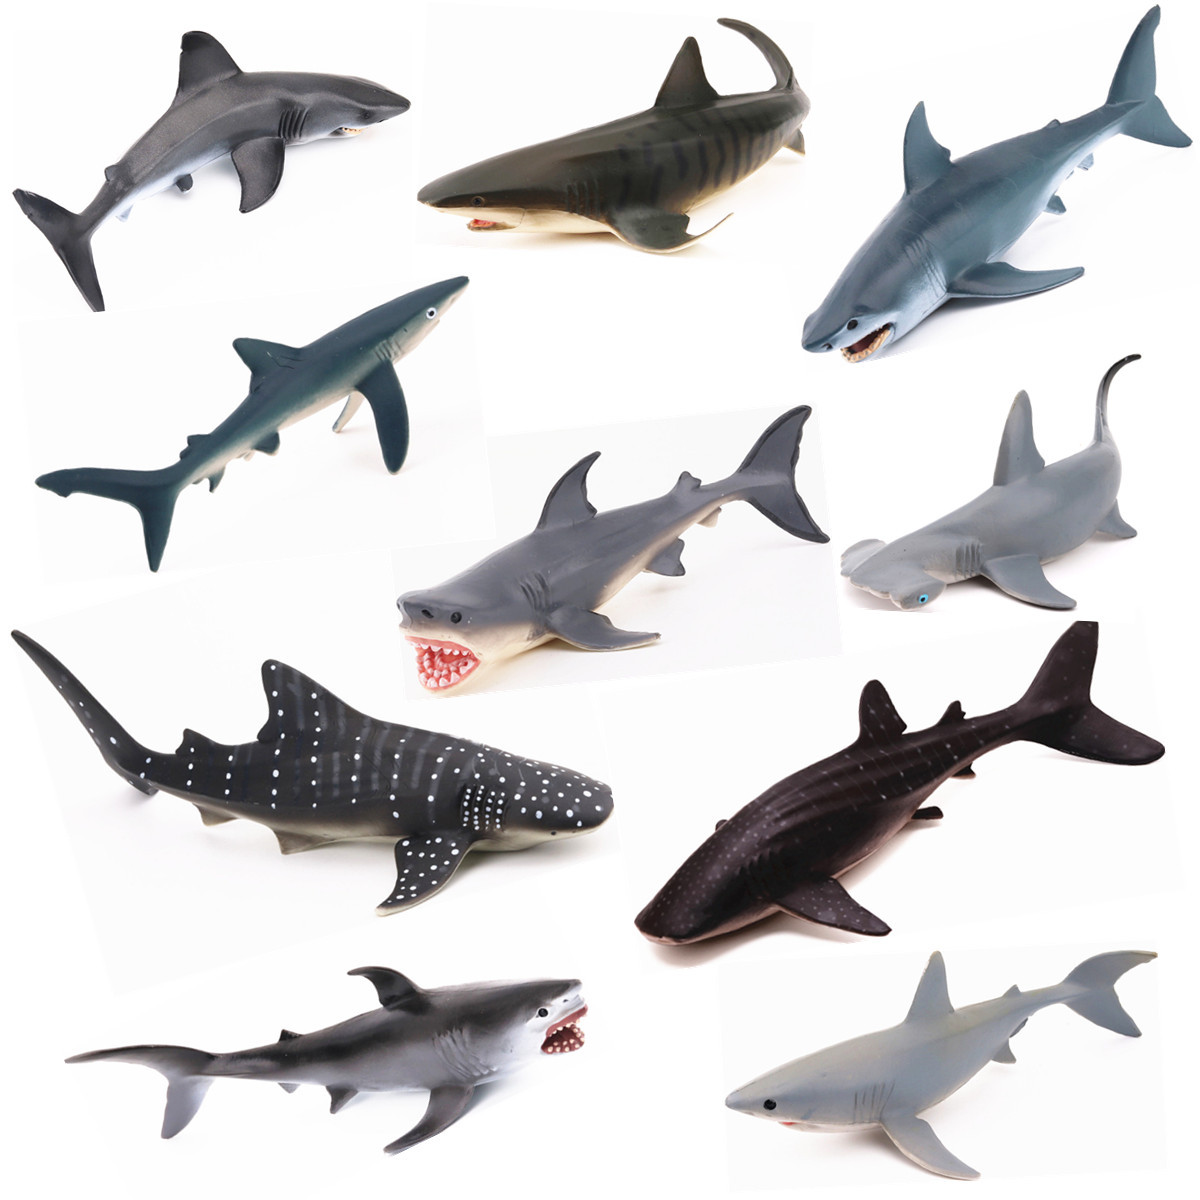 Realistic-Ocean-Animal-Model-Marine-Animal-Solid-Whale-Shark-Series-Science-Education-Puzzle-Toys-1460134-1